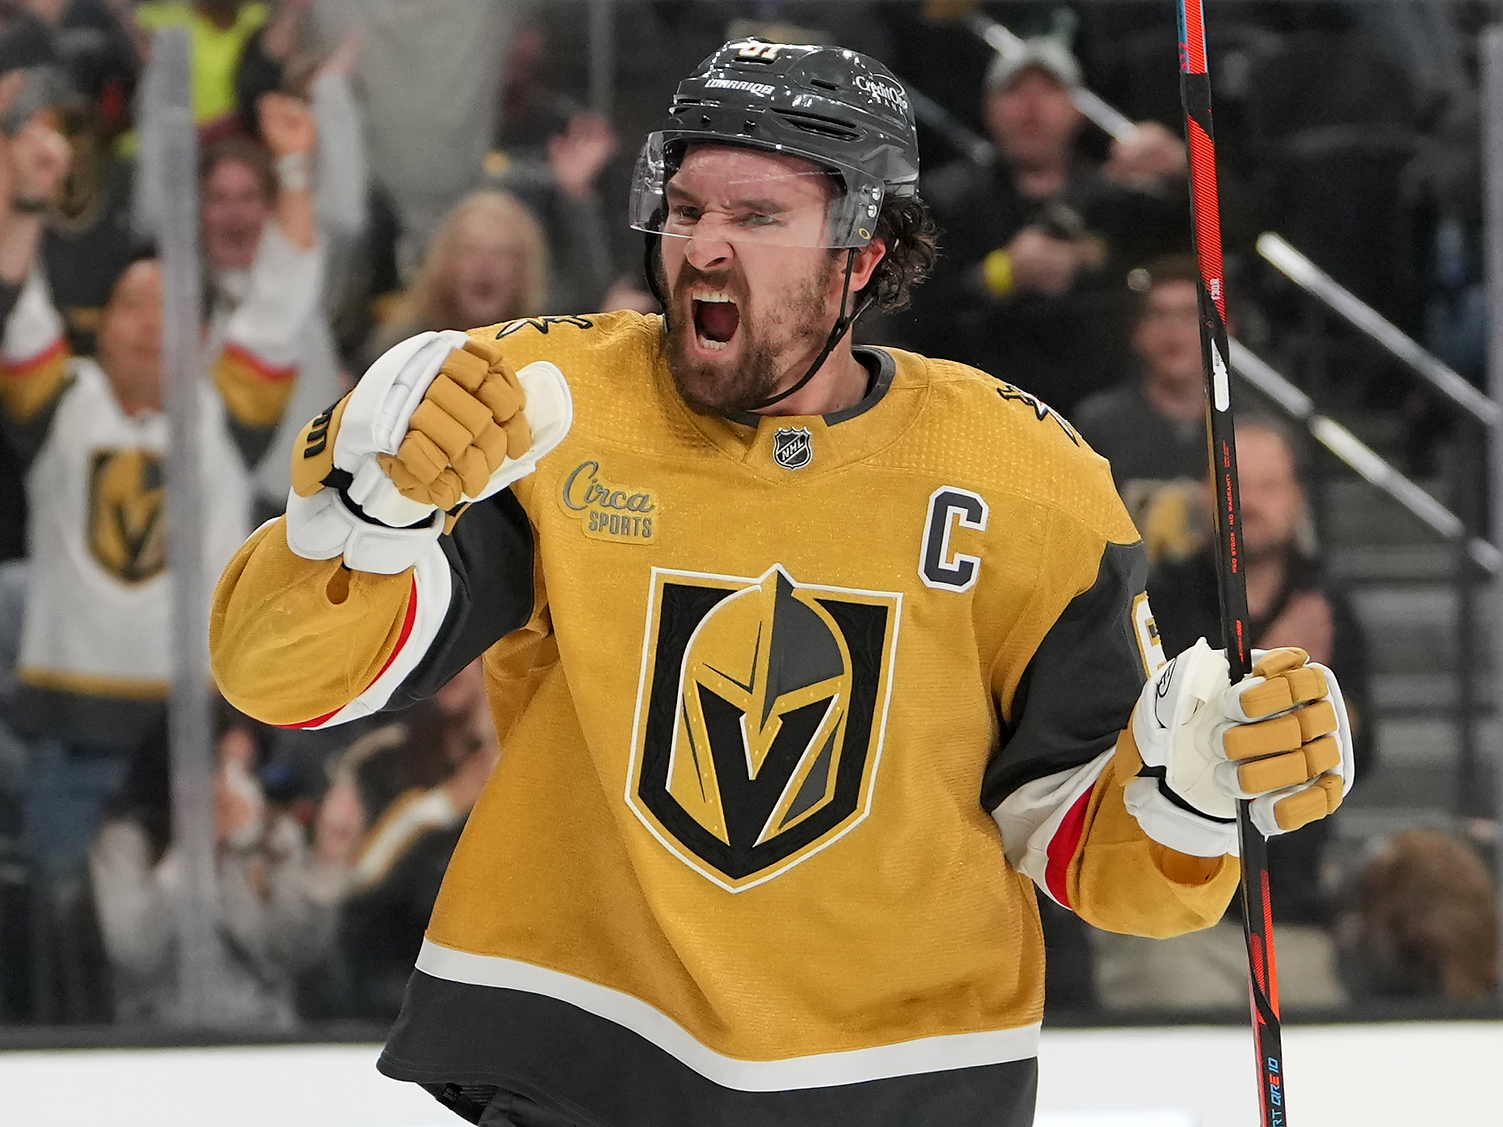 Vegas not sweating underdog role in Stanley Cup Finals